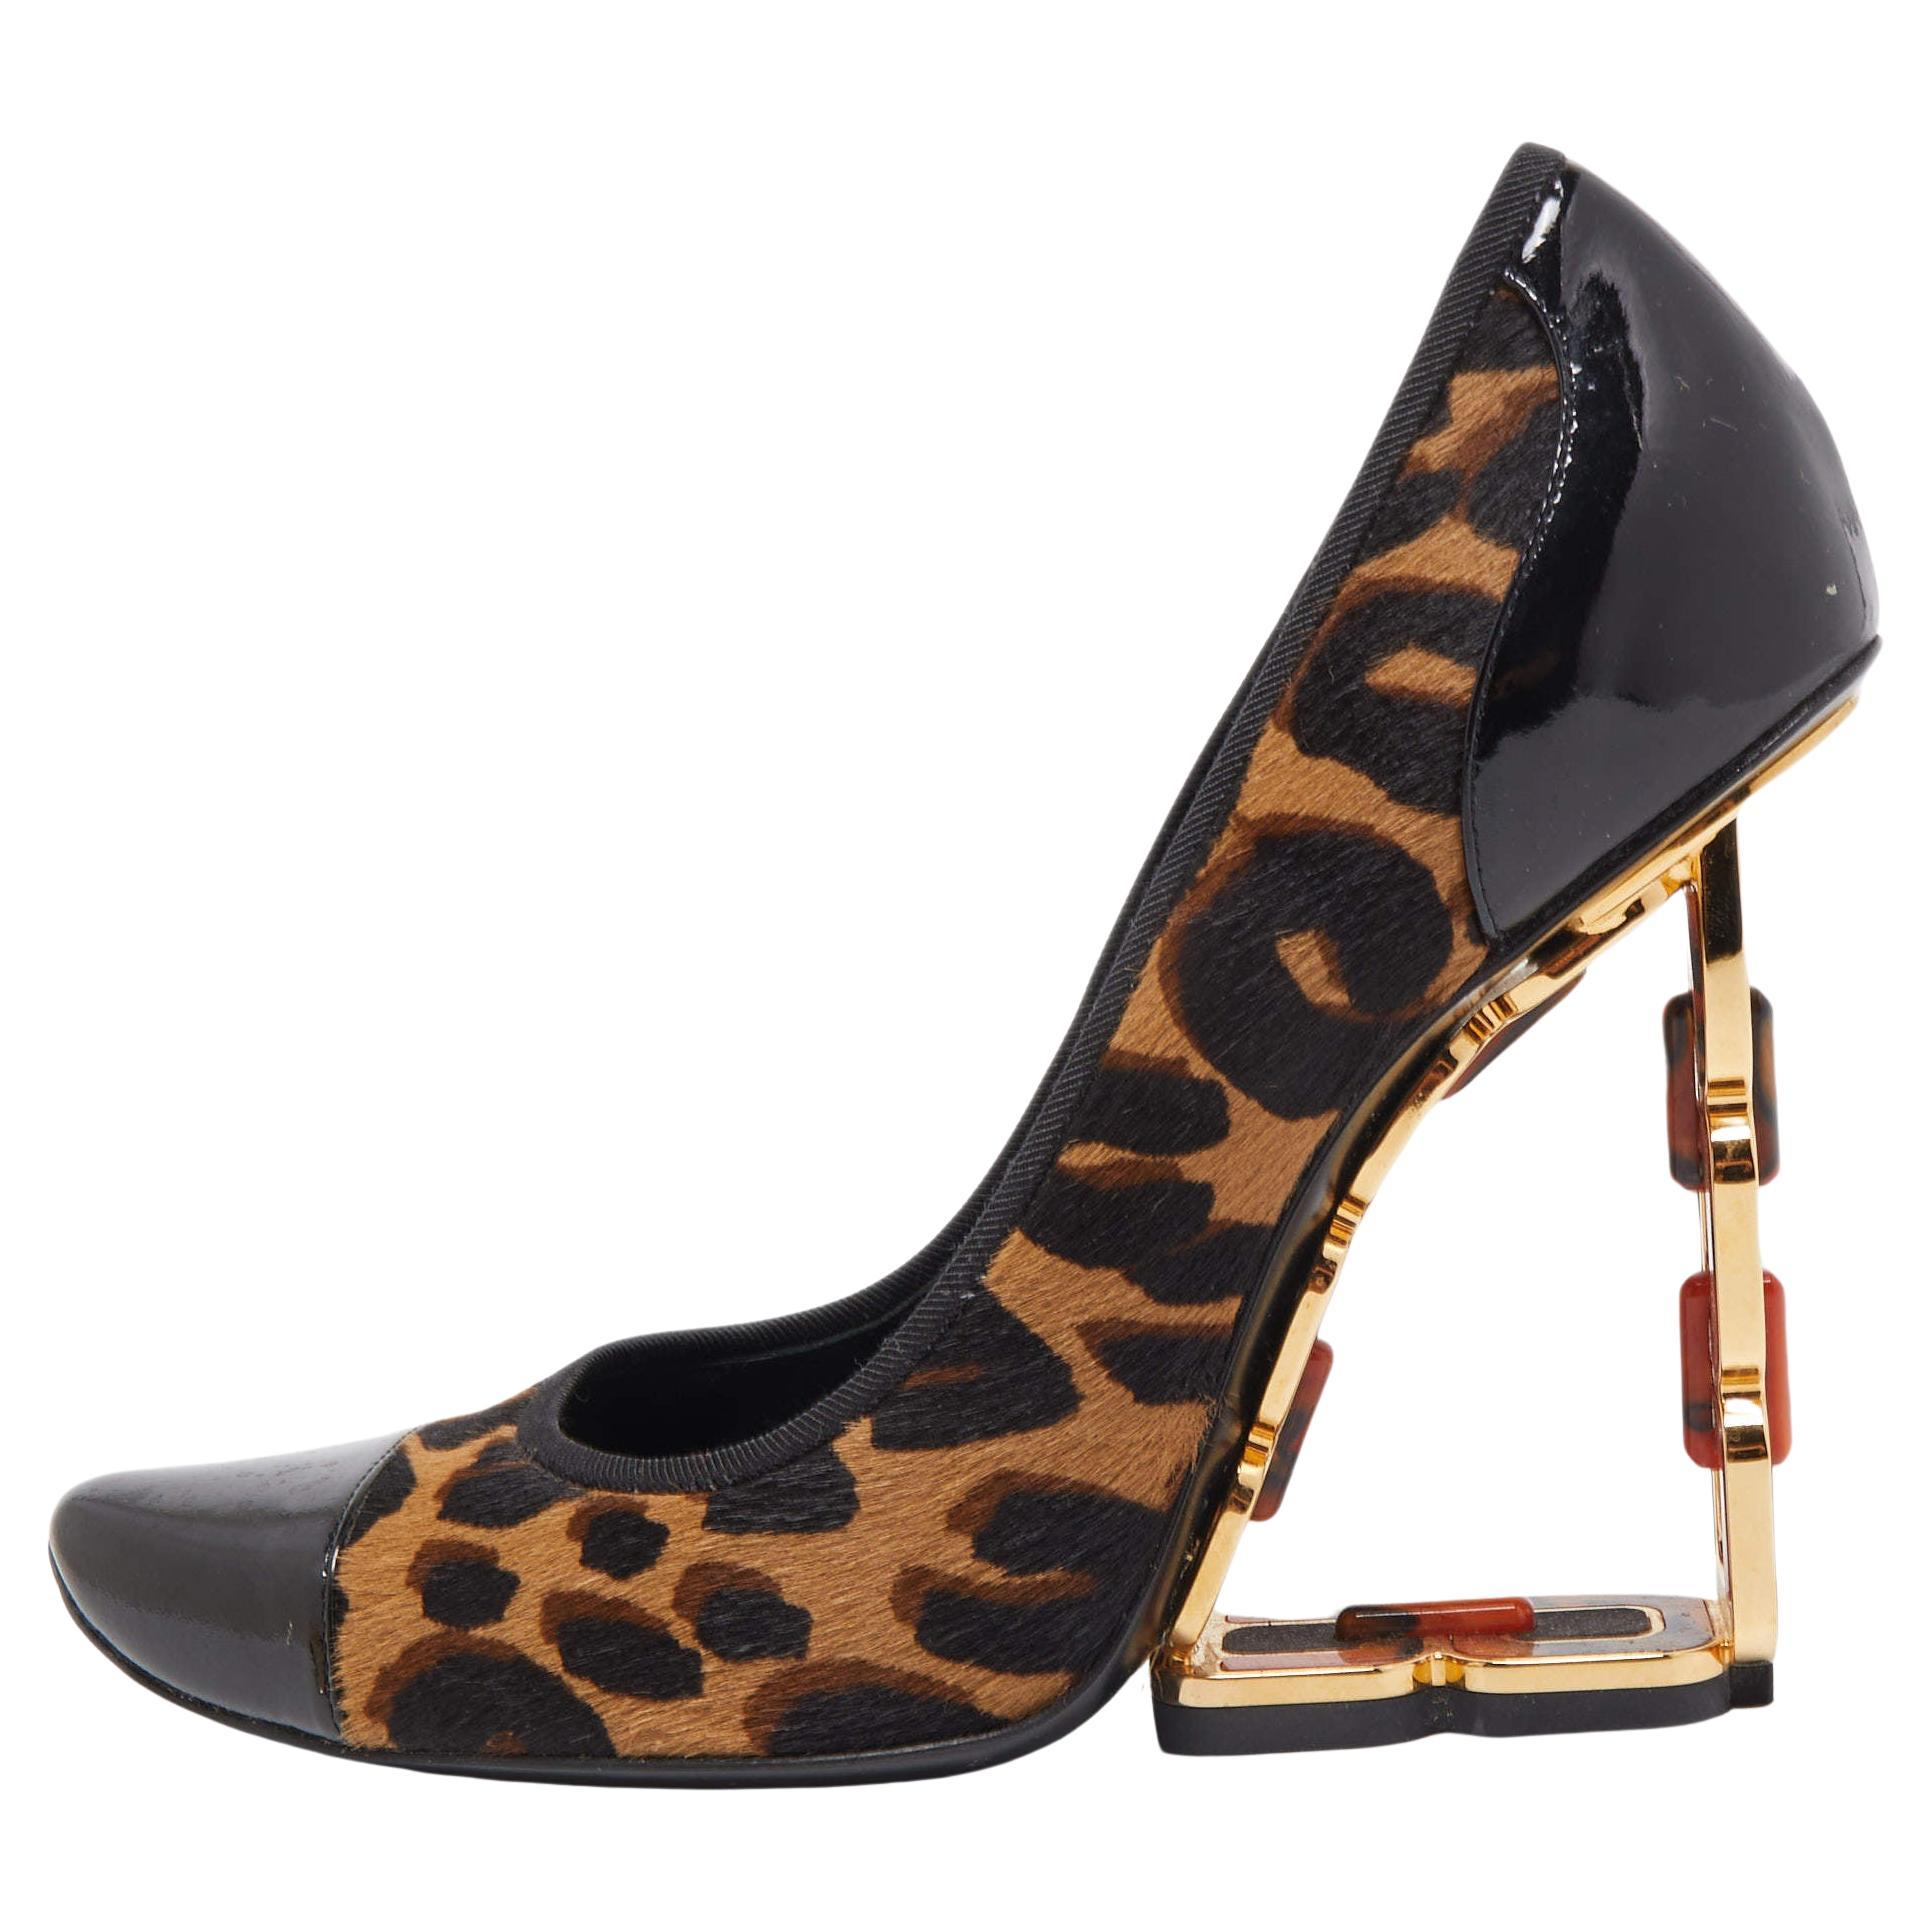 Louis Vuitton Tricolor Leopard Print Calf Hair and Patent Leather Wedge Pumps Si For Sale